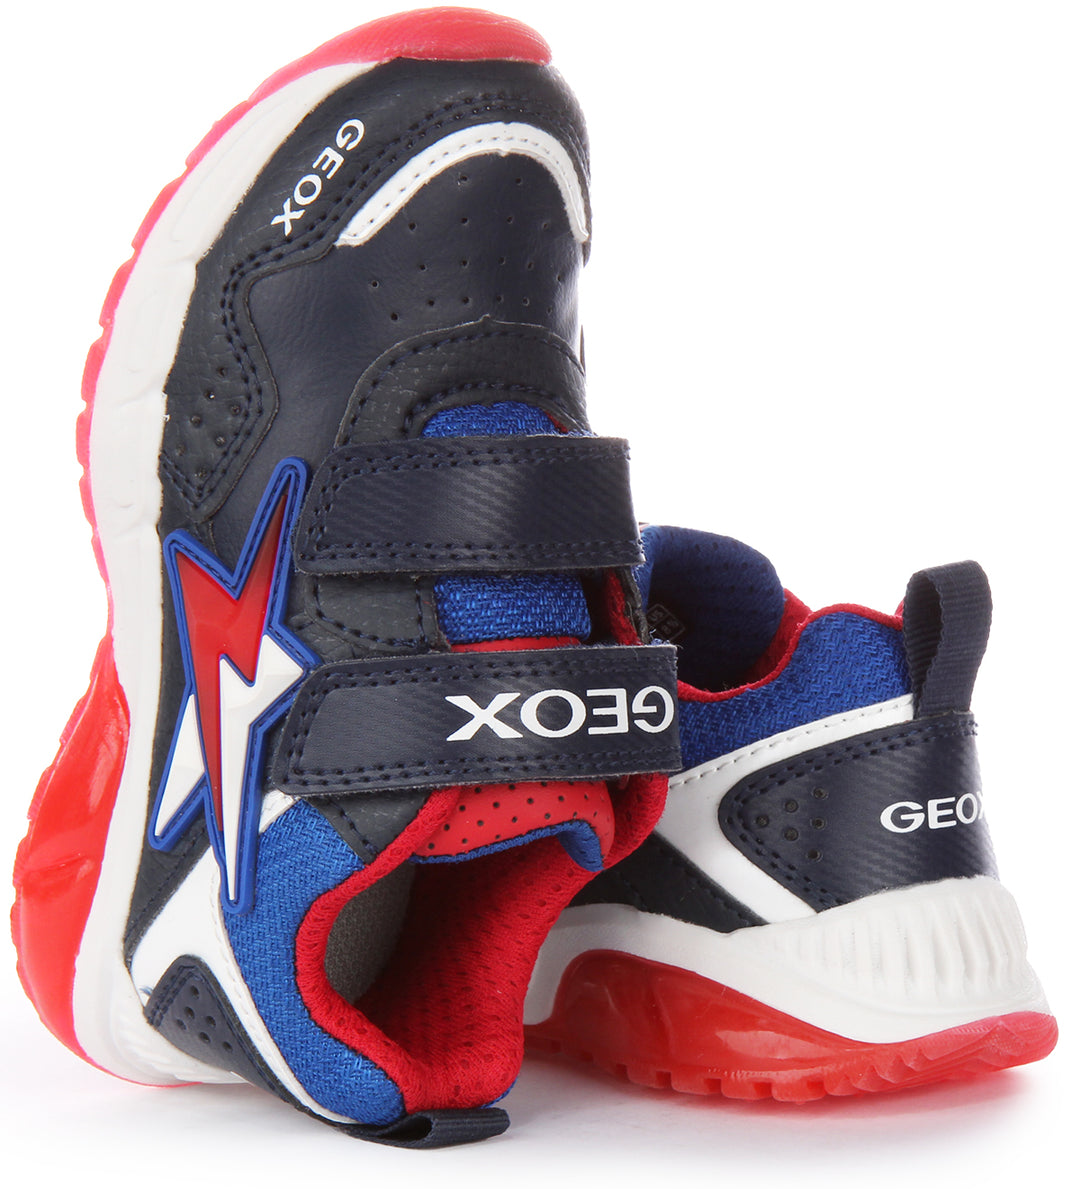 Geox J Spaziale In Navy Red For Kids